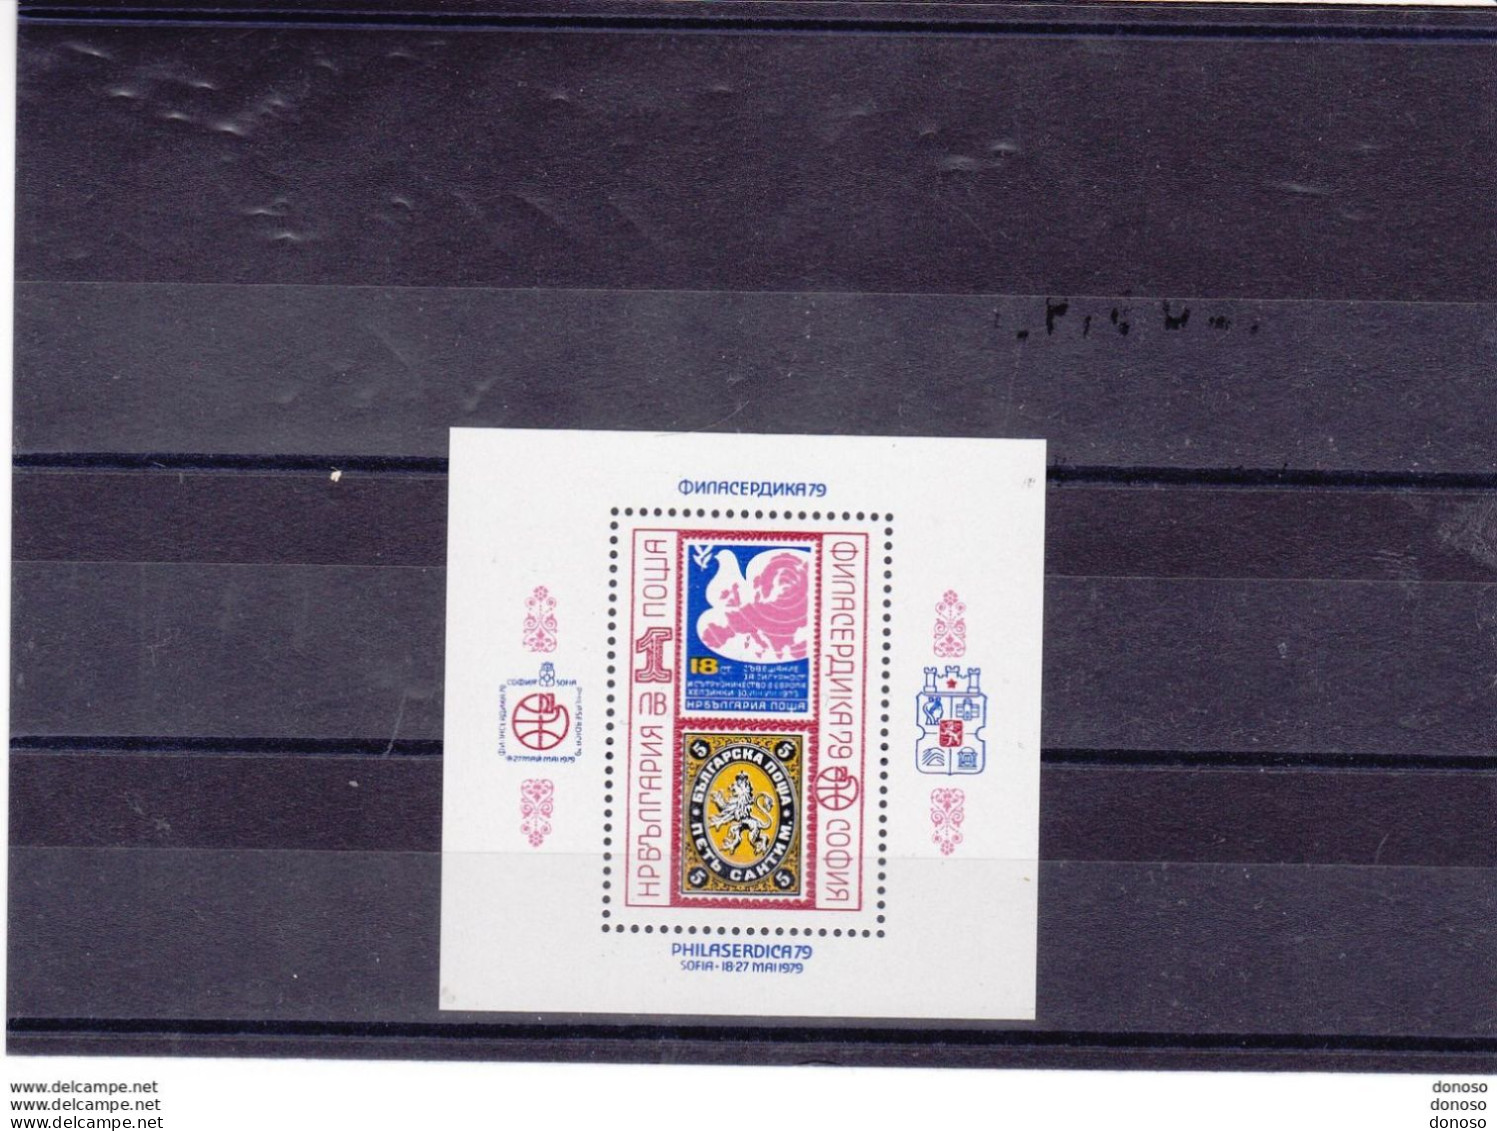 BULGARIE 1979 Philaserdica, Timbres Sur Timbres Yvert BF 85, Michel Block 90 NEUF** MNH Cote 12 Euros - Blocs-feuillets